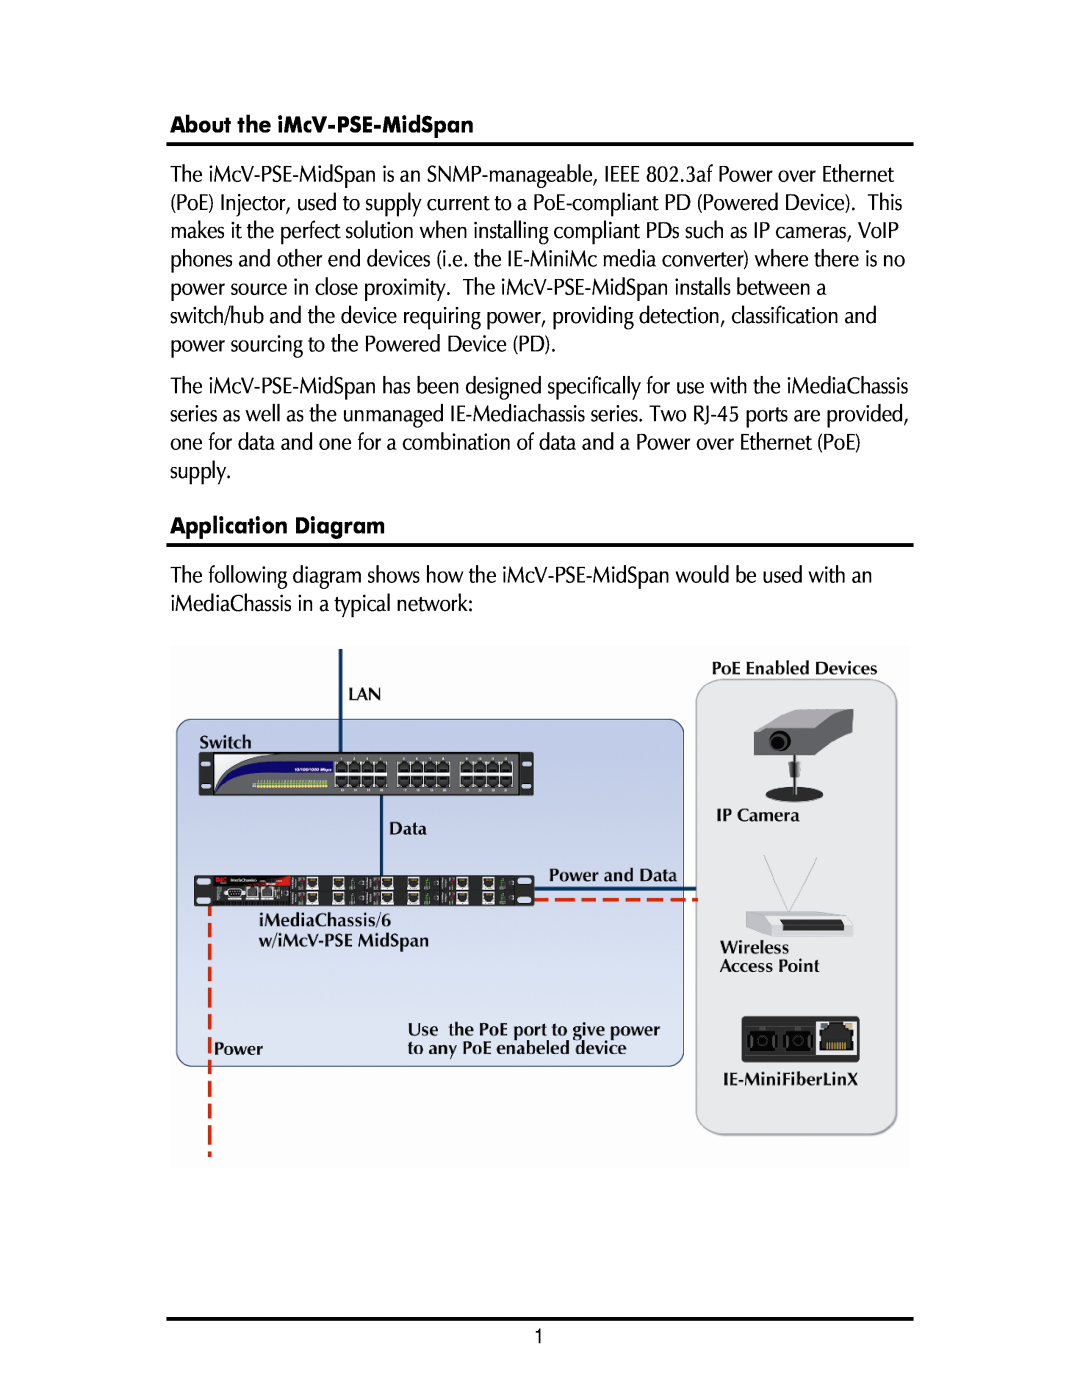 IMC Networks operation manual About the iMcV-PSE-MidSpan, Application Diagram 